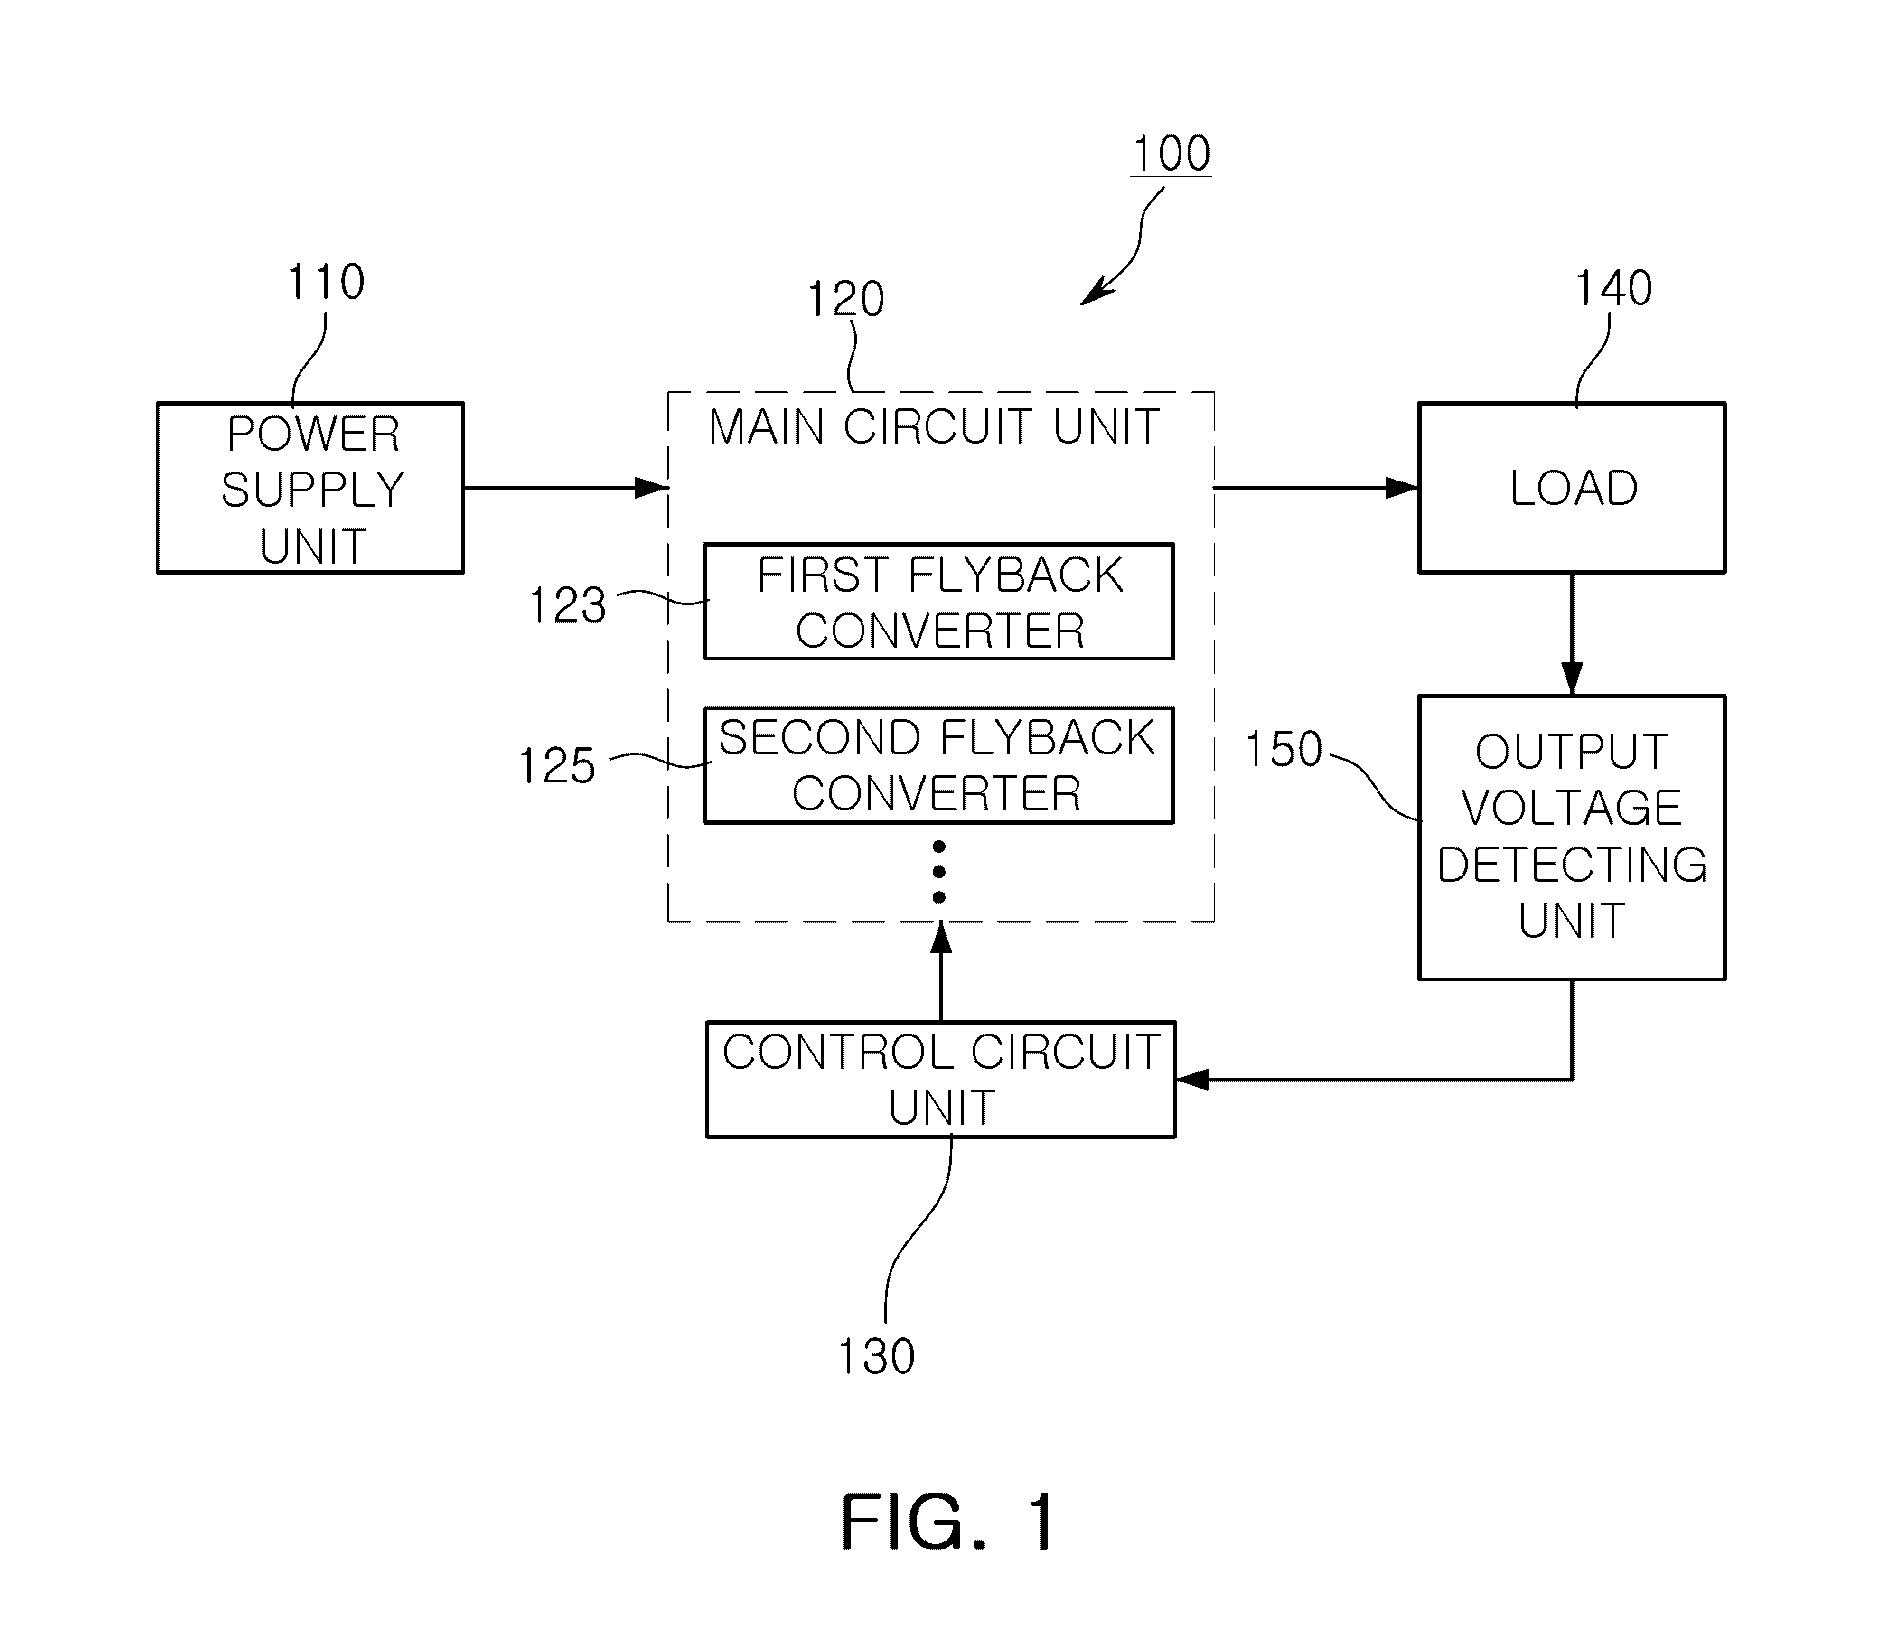 Power supplying apparatus, method of operating the same, and solar power generation system including the same